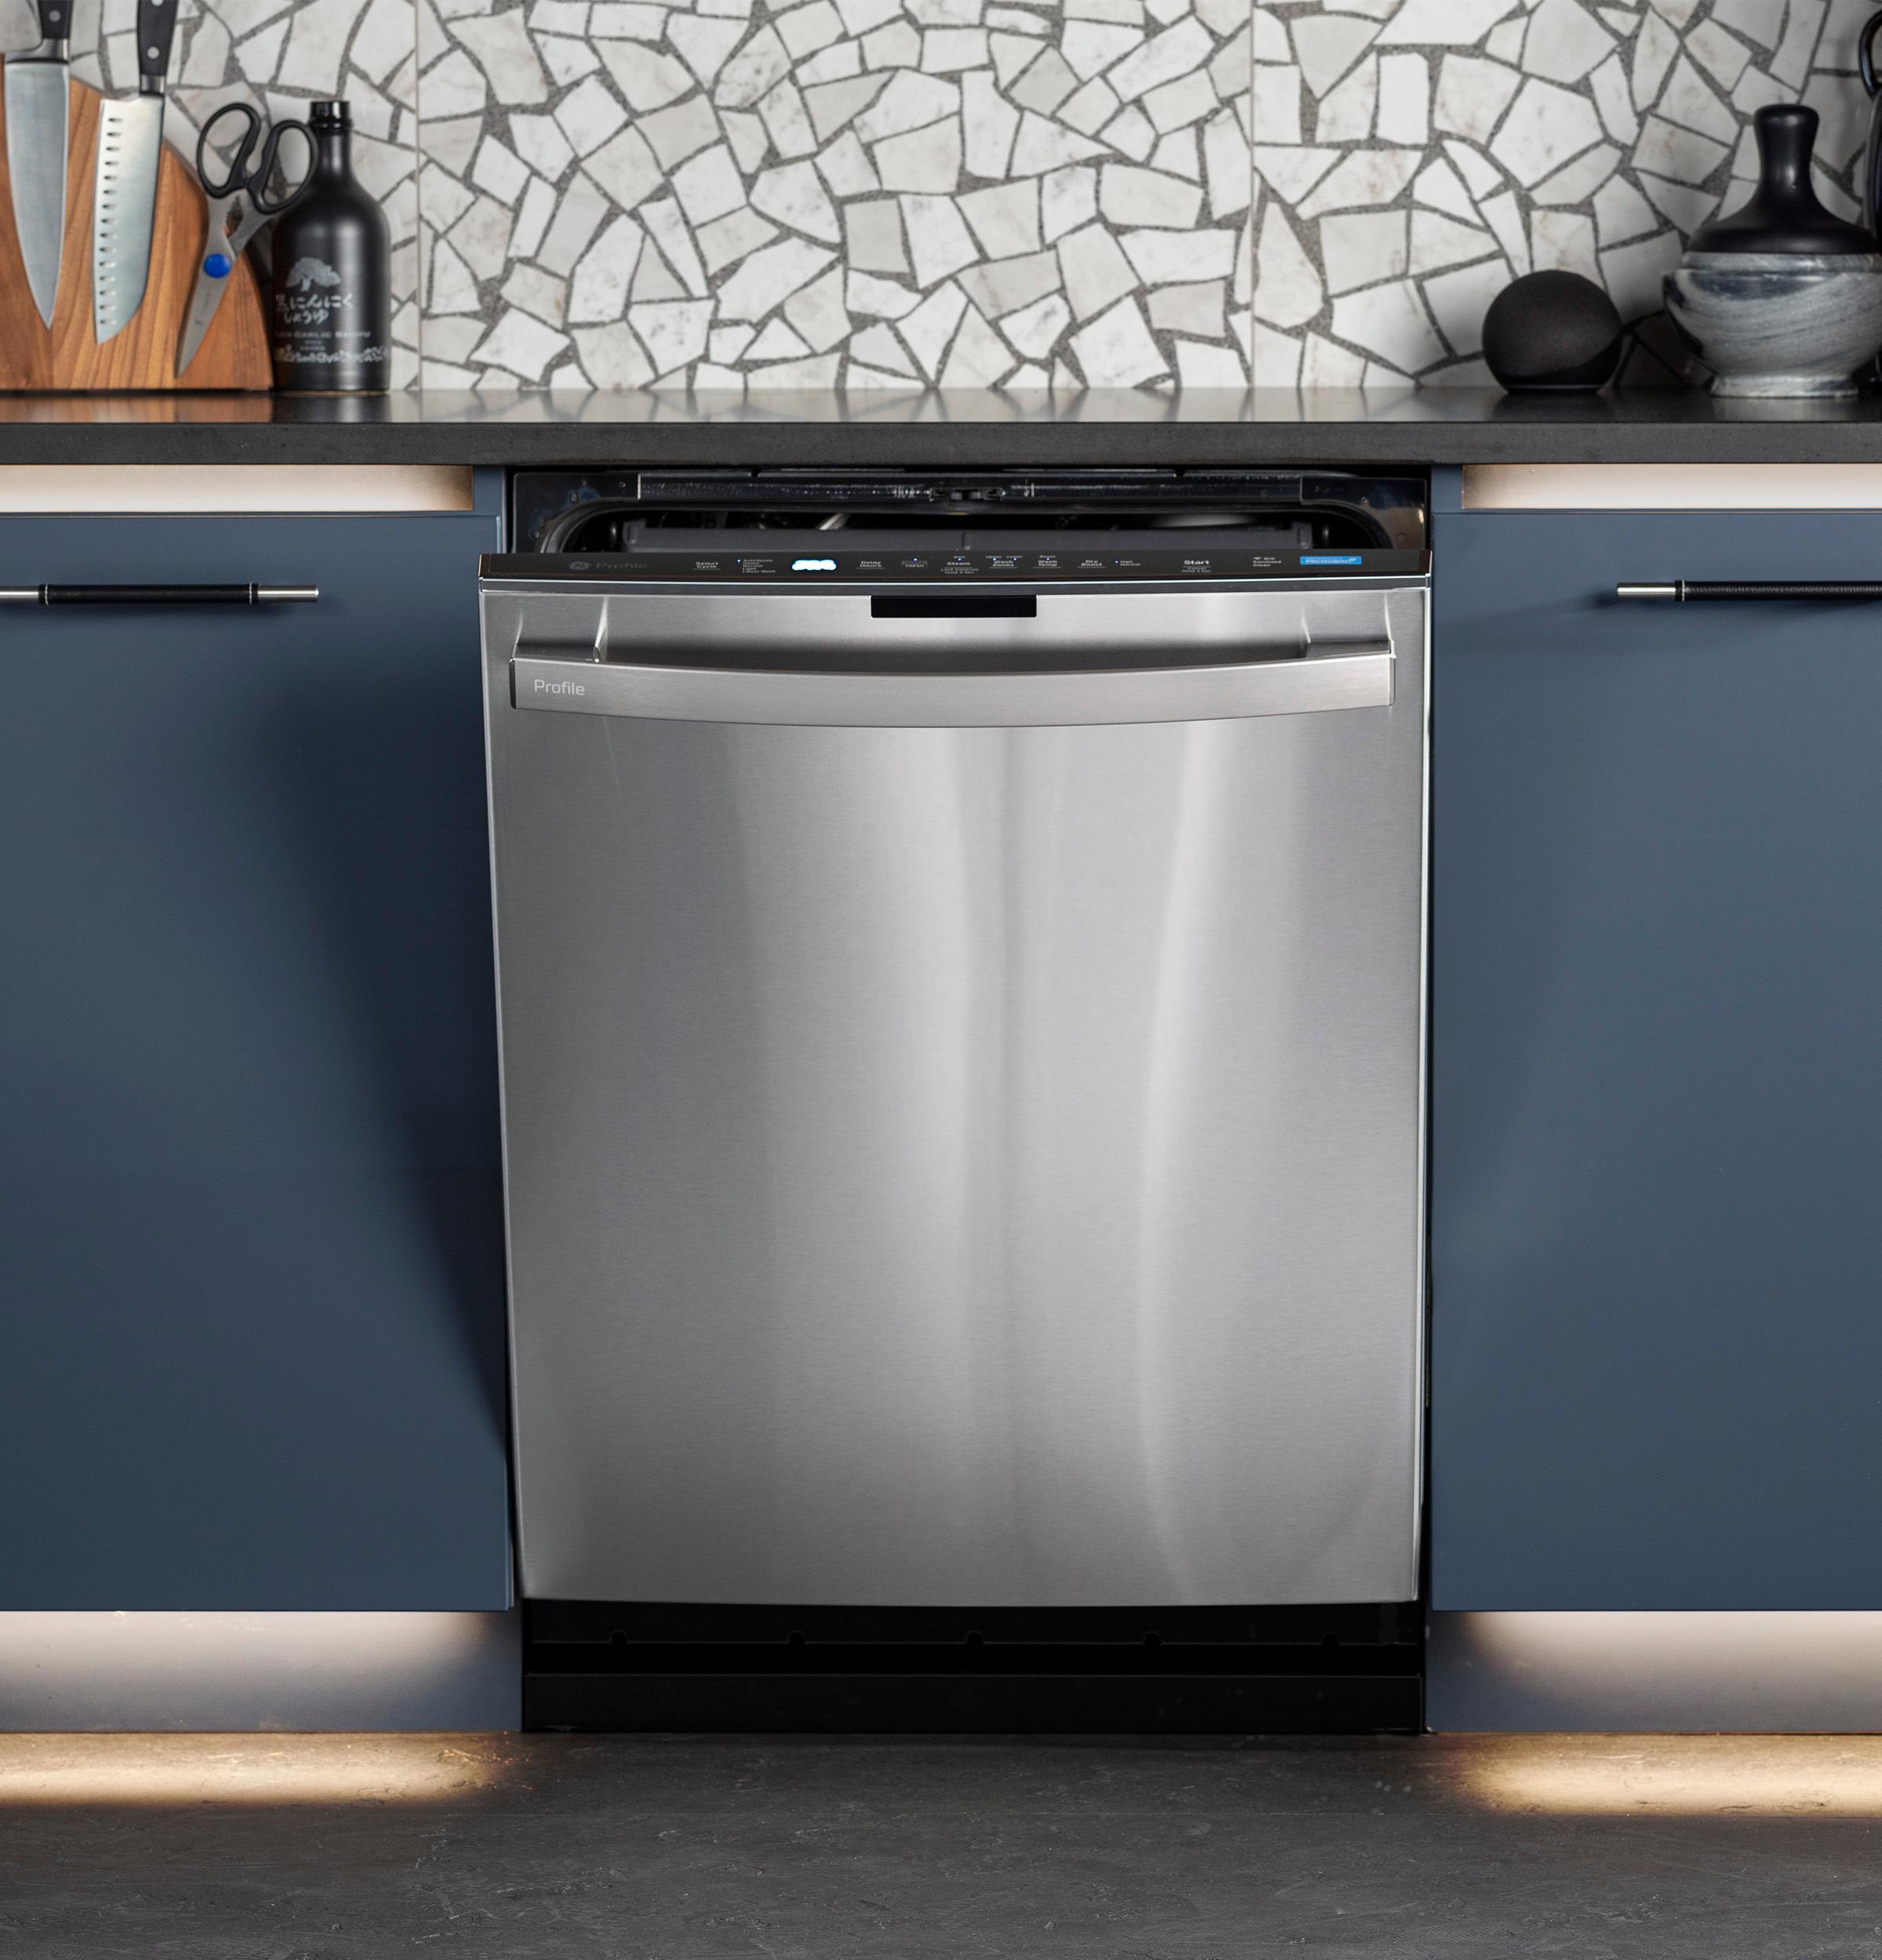 GE Profile™ ENERGY STAR® UltraFresh System Dishwasher with Stainless Steel Interior